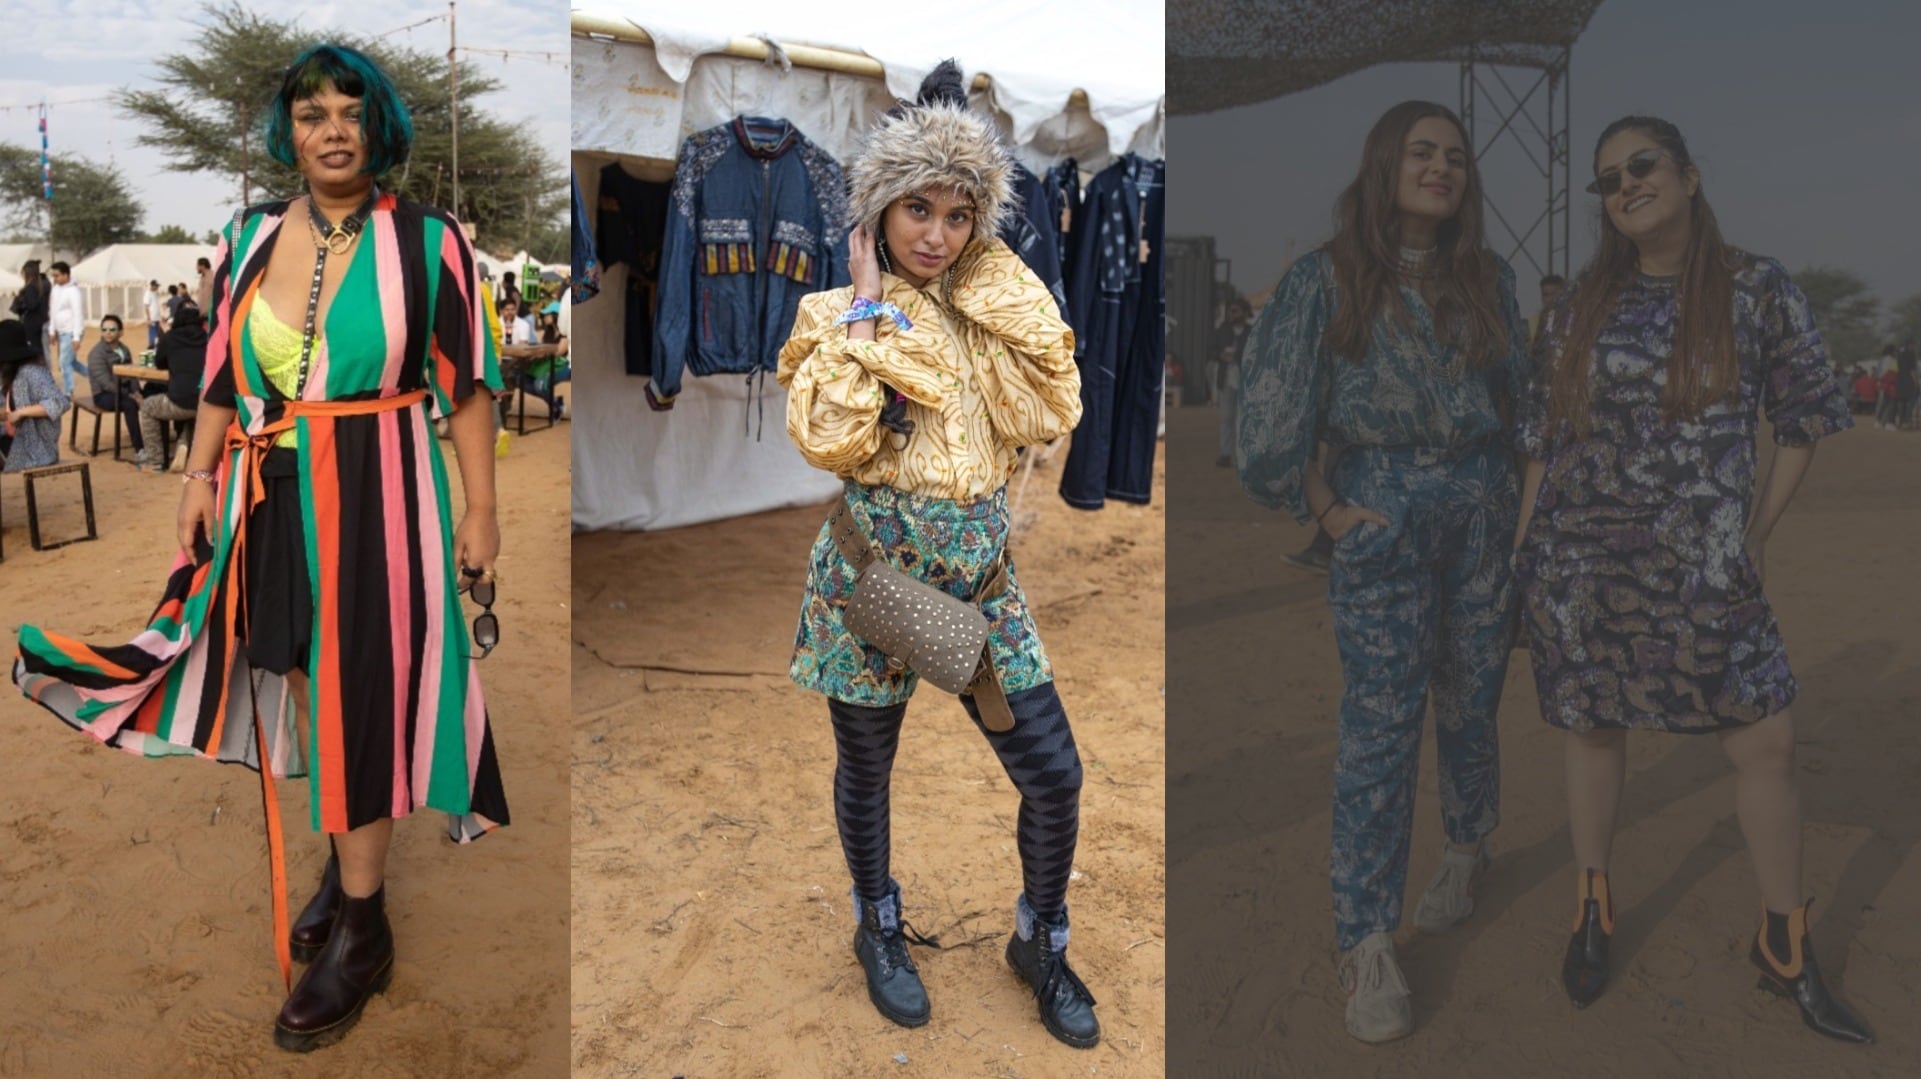 From Magnetic Fields 2019, snapshots of the most original festival fashion